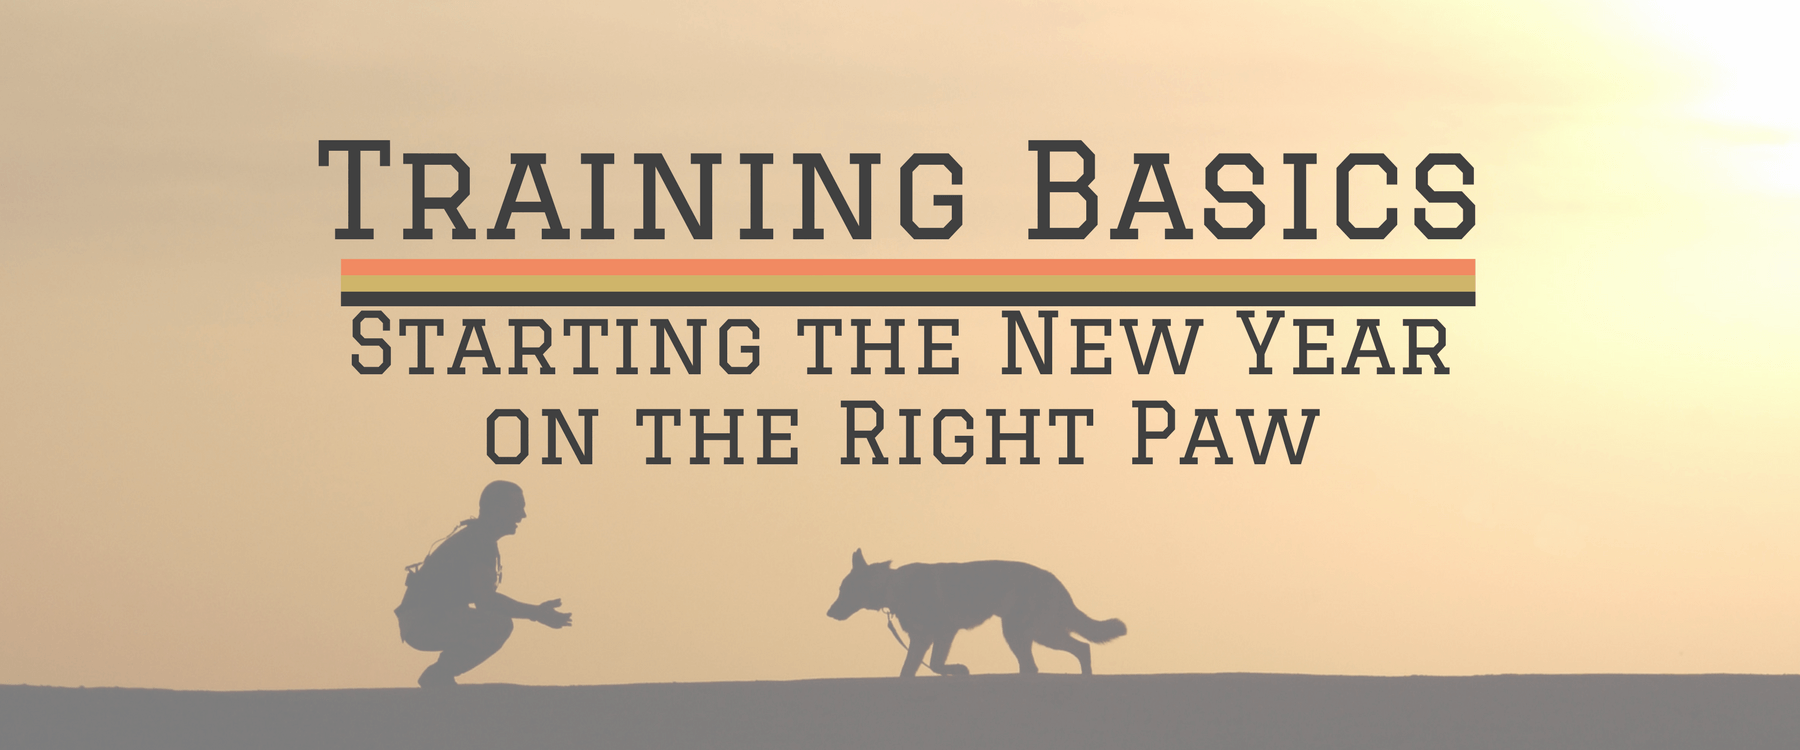 Training Basics: Starting the New Year on the Right Paw